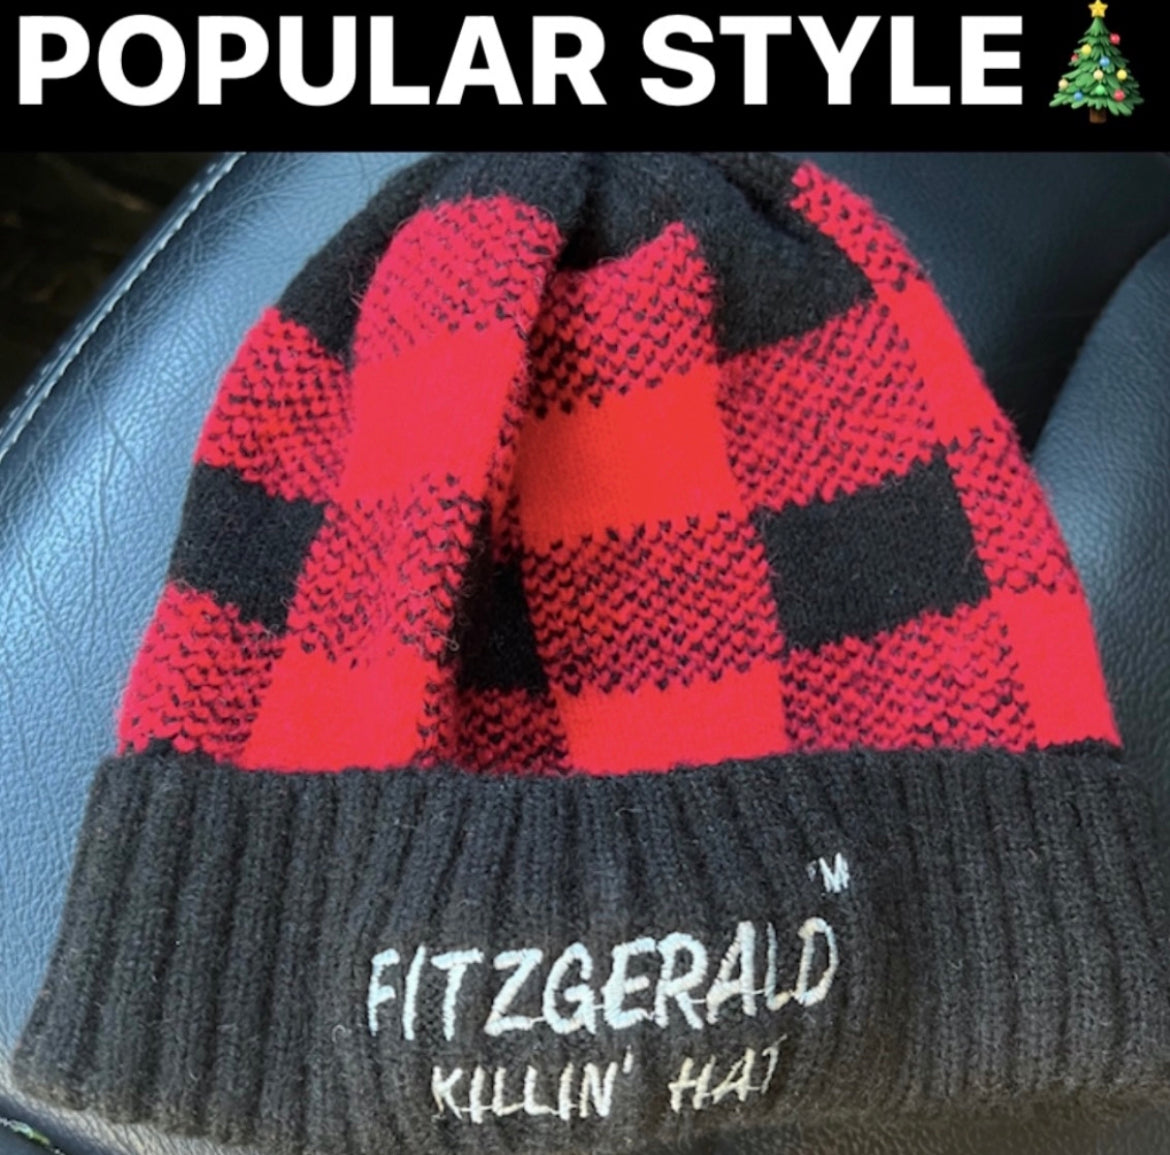 RED PLAID FITZGERALD KILLIN HAT QUALITY EMBROIDERED CUFFED KNIT HAT LIMITED SUPPLY